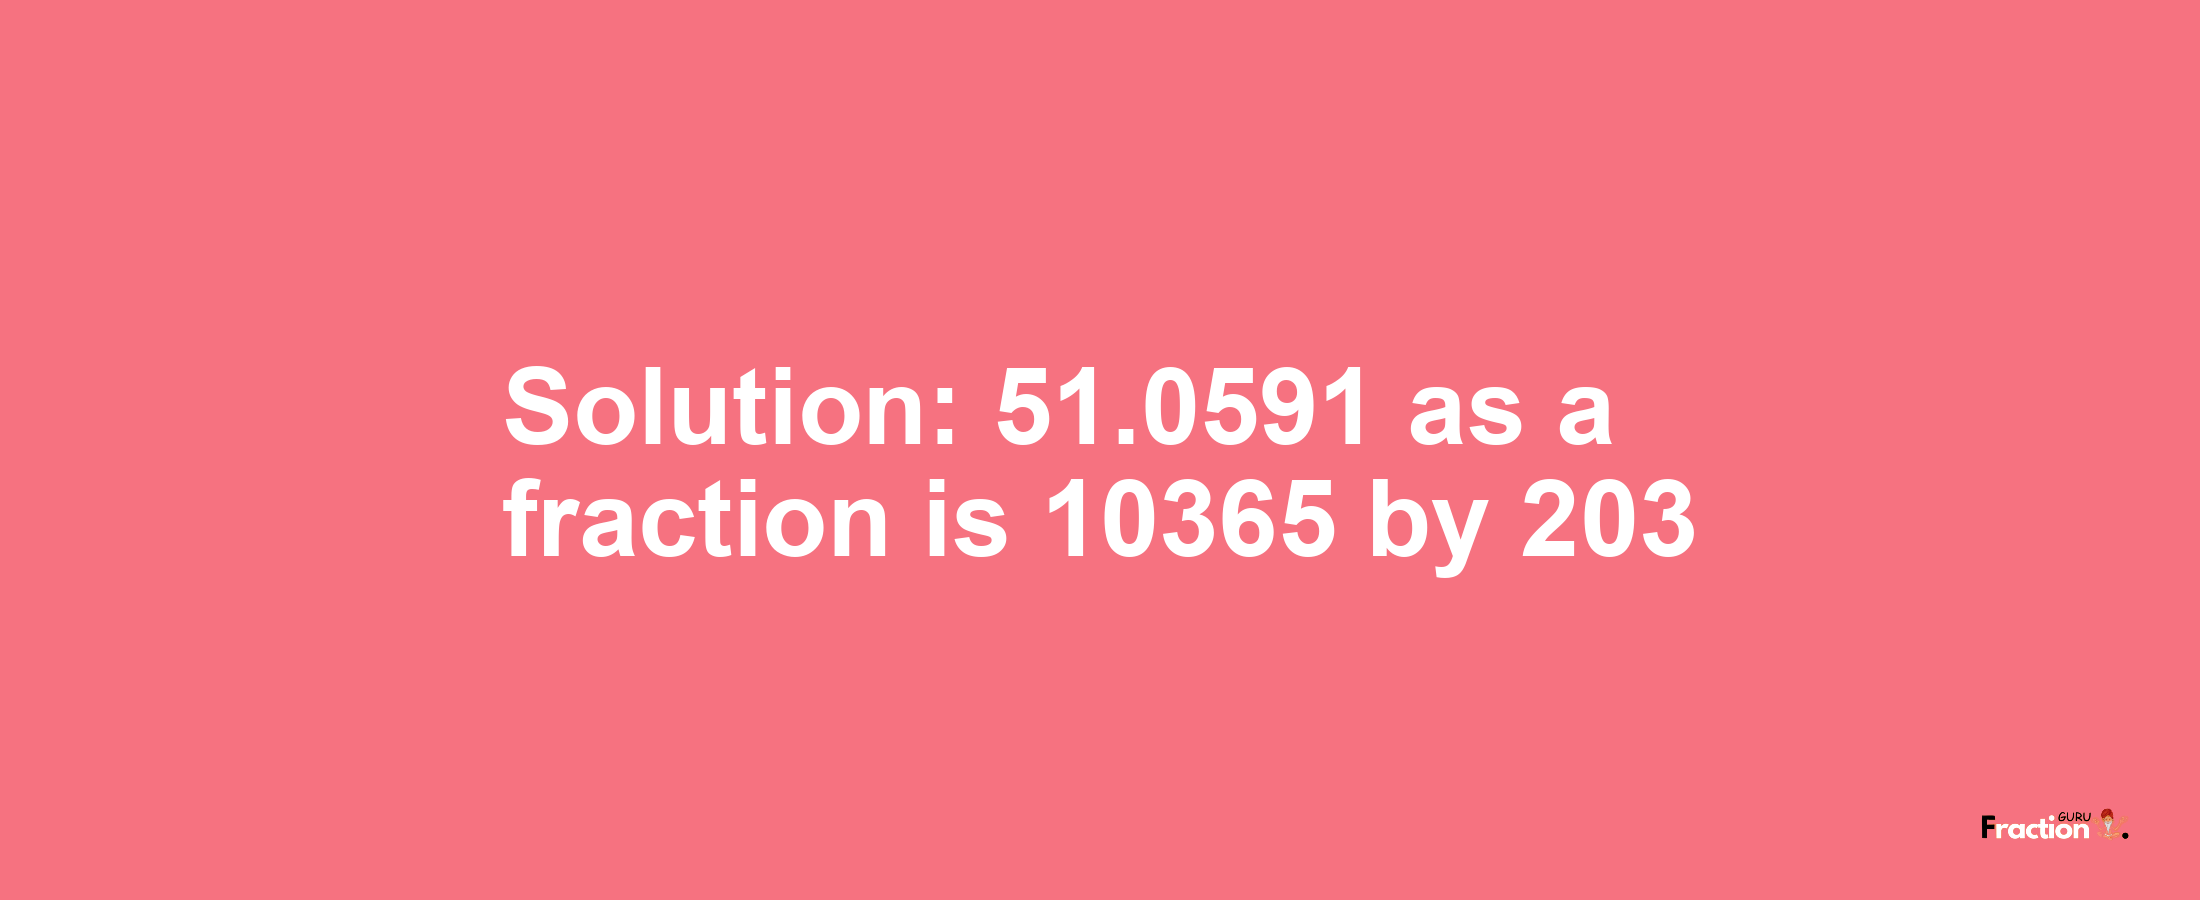 Solution:51.0591 as a fraction is 10365/203